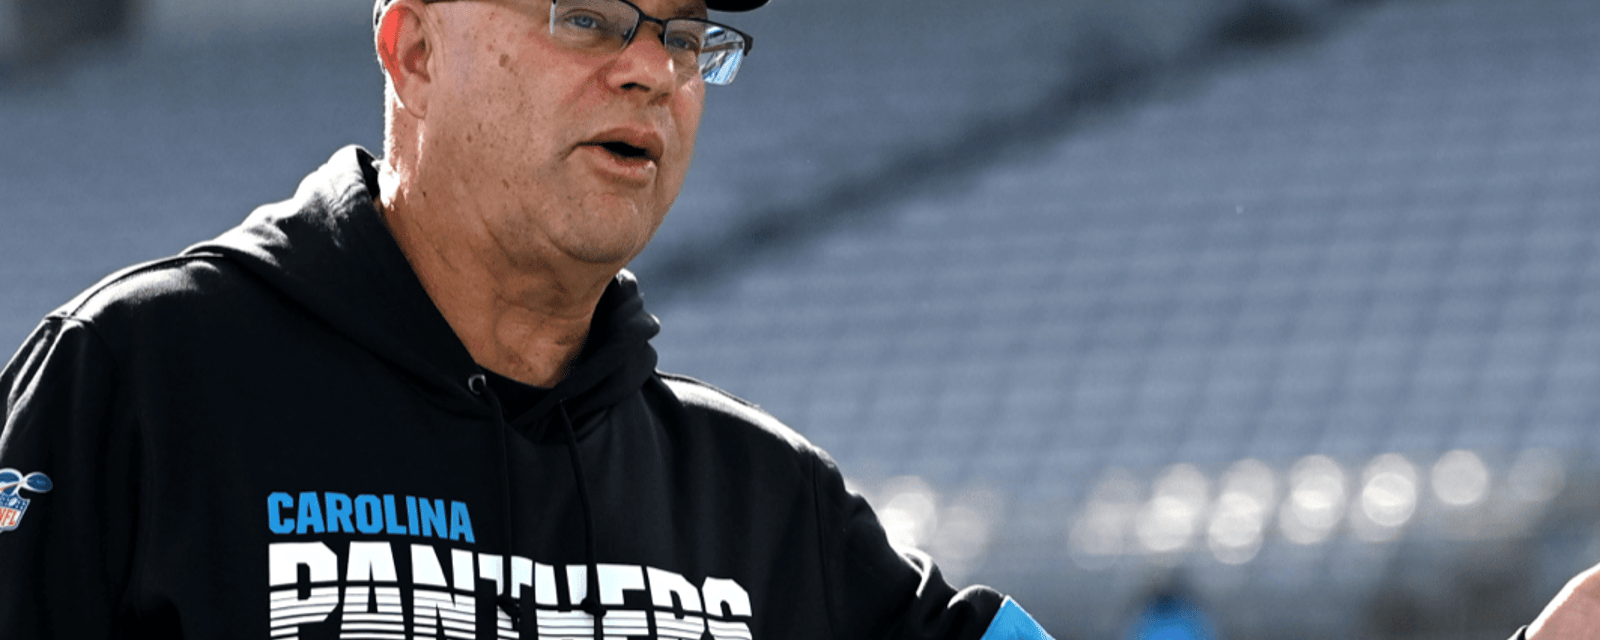 NFL announces punishment for Carolina Panthers chairman